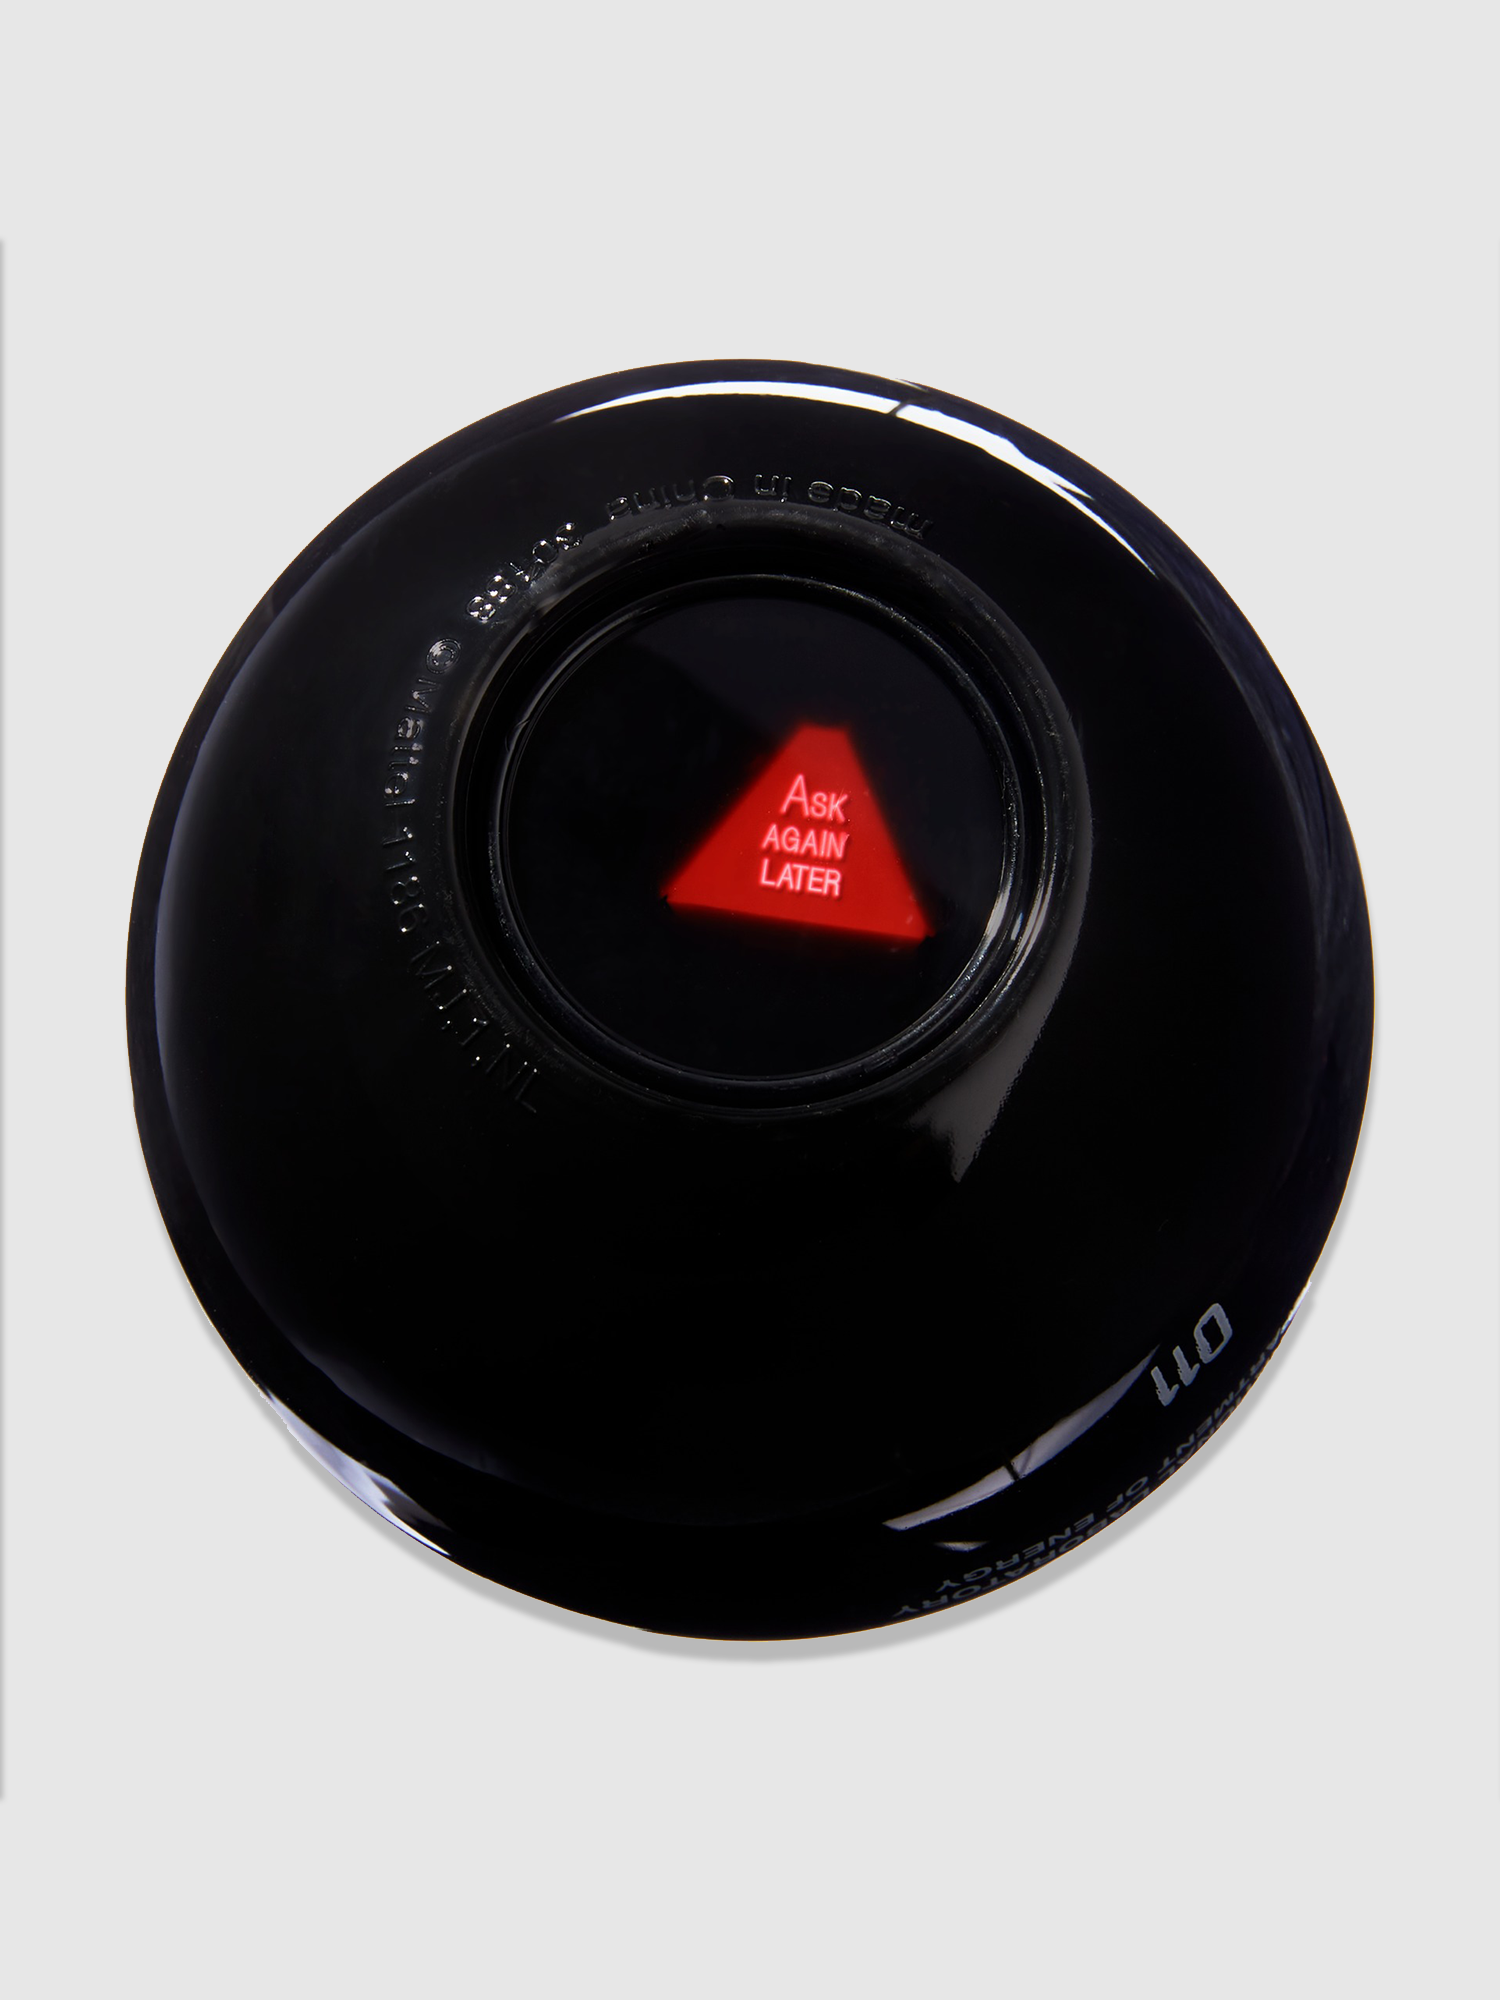 LAST CHANCE - LIMITED STOCK - Magic 8 Ball Question Toy - Fortune Tell